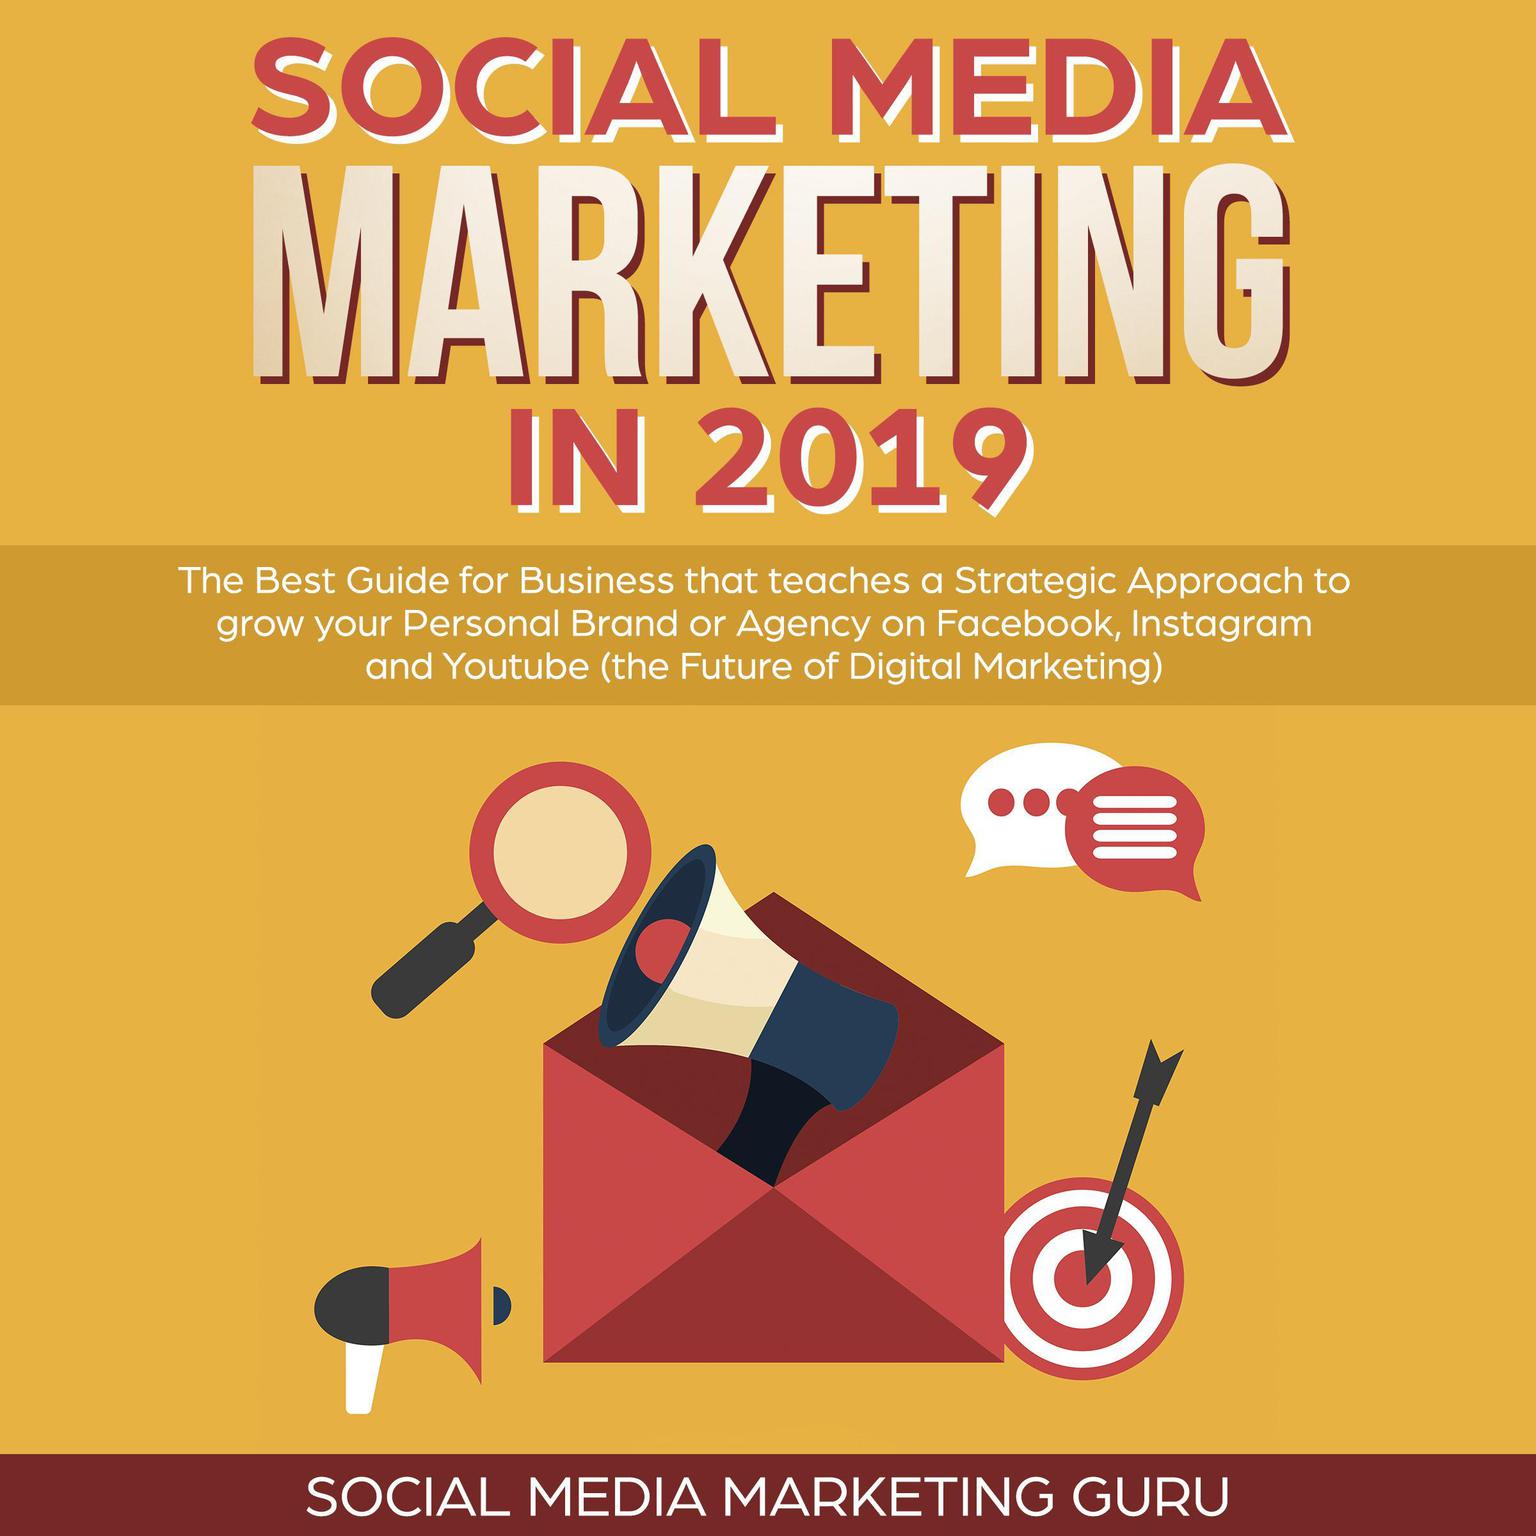 Social Media Marketing in 2019: The Best Guide for Business that teaches a Strategic Approach to Grow Your Personal Brand or Agency on Facebook, Instagram and Youtube (the Future of Digital Marketing) Audiobook, by Social Media Marketing Guru